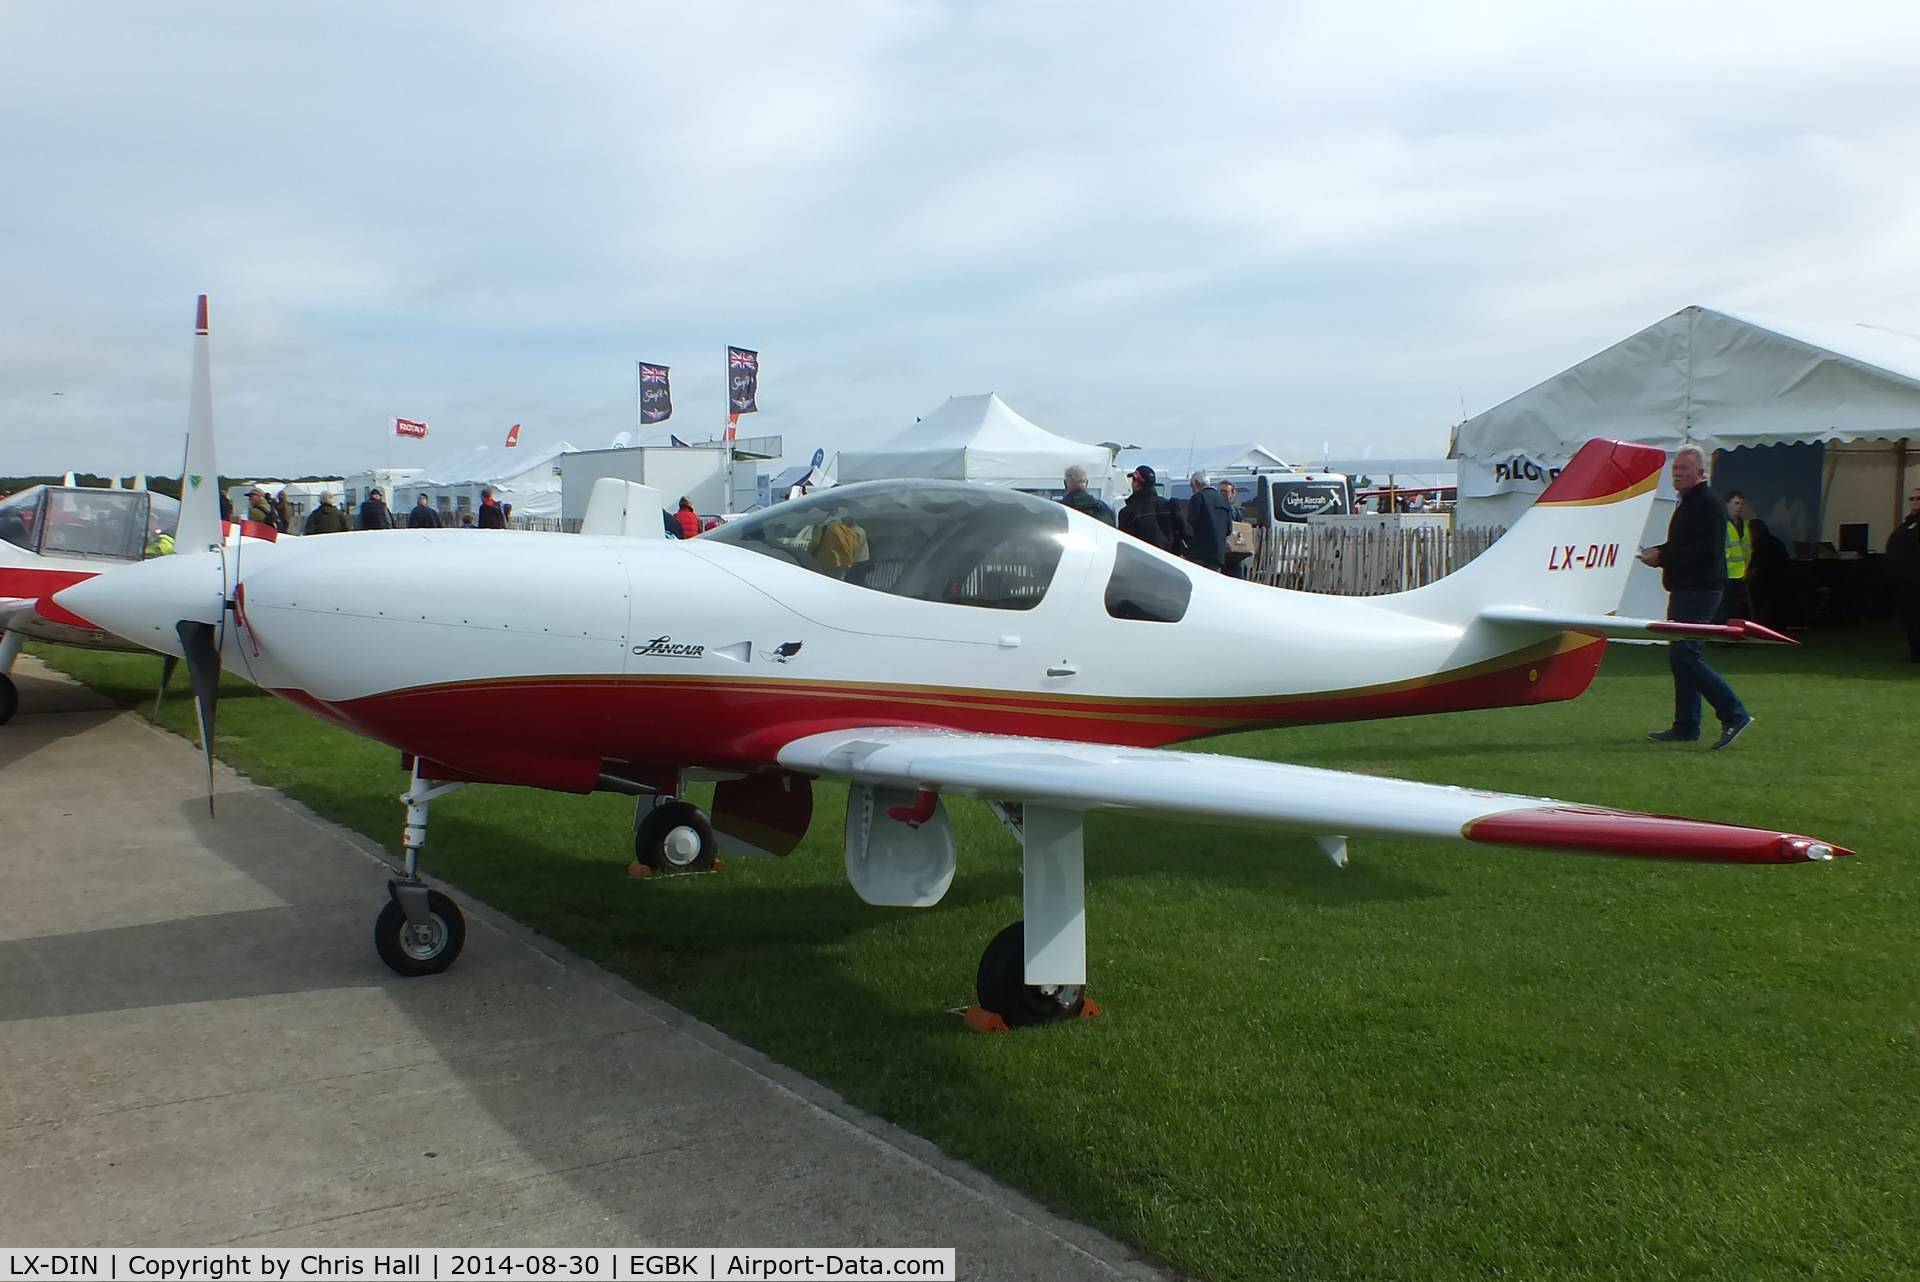 LX-DIN, 2003 Lancair Legacy 2000 C/N L2K-137, at the LAA Rally 2014, Sywell